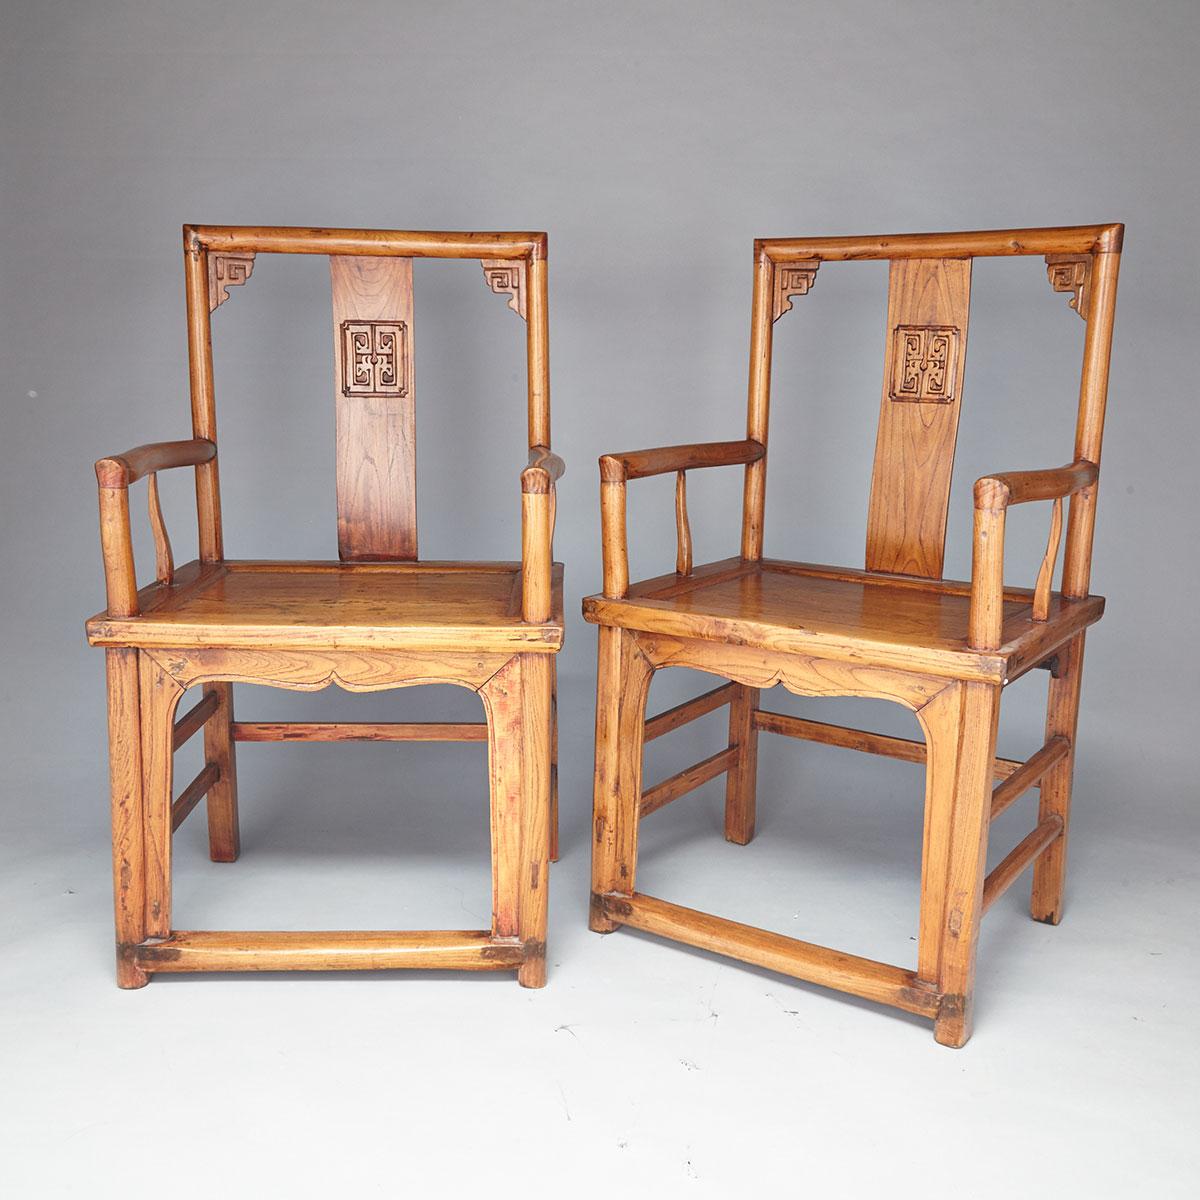 Pair of Elm Wood Arm Chairs, Early 20th Century